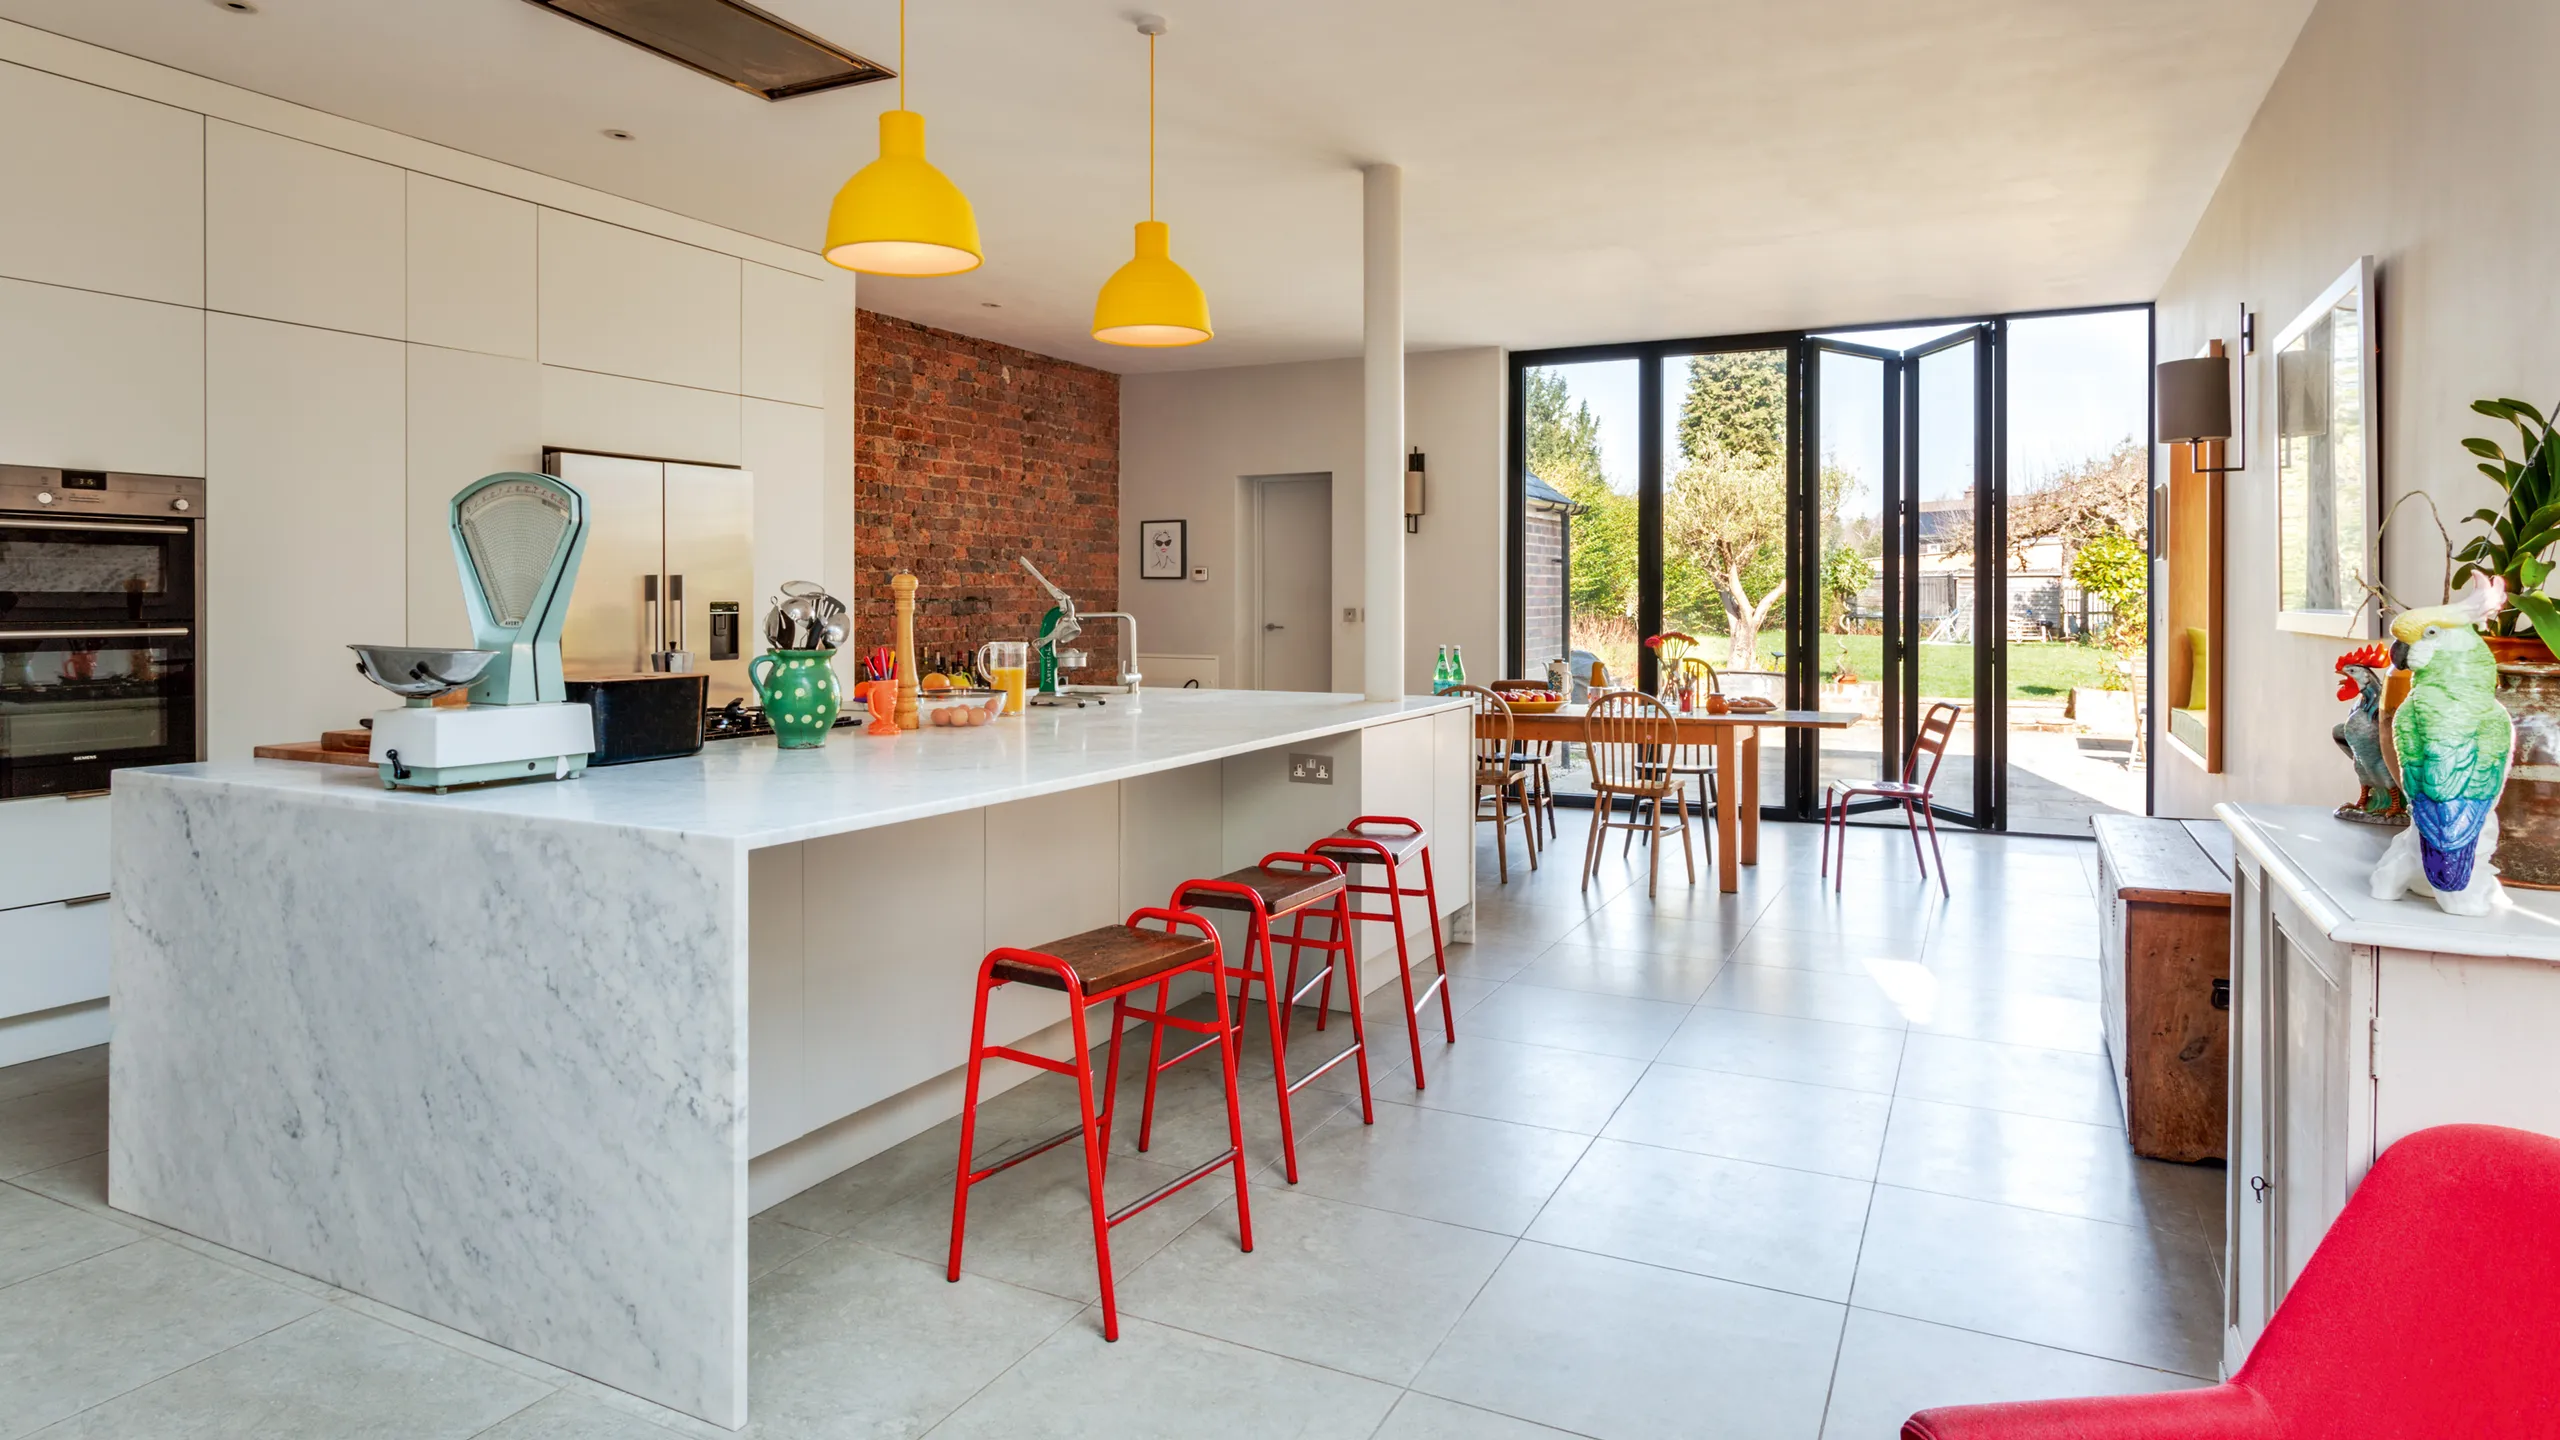 Real homes: a contemporary kitchen extension full of clever ideas